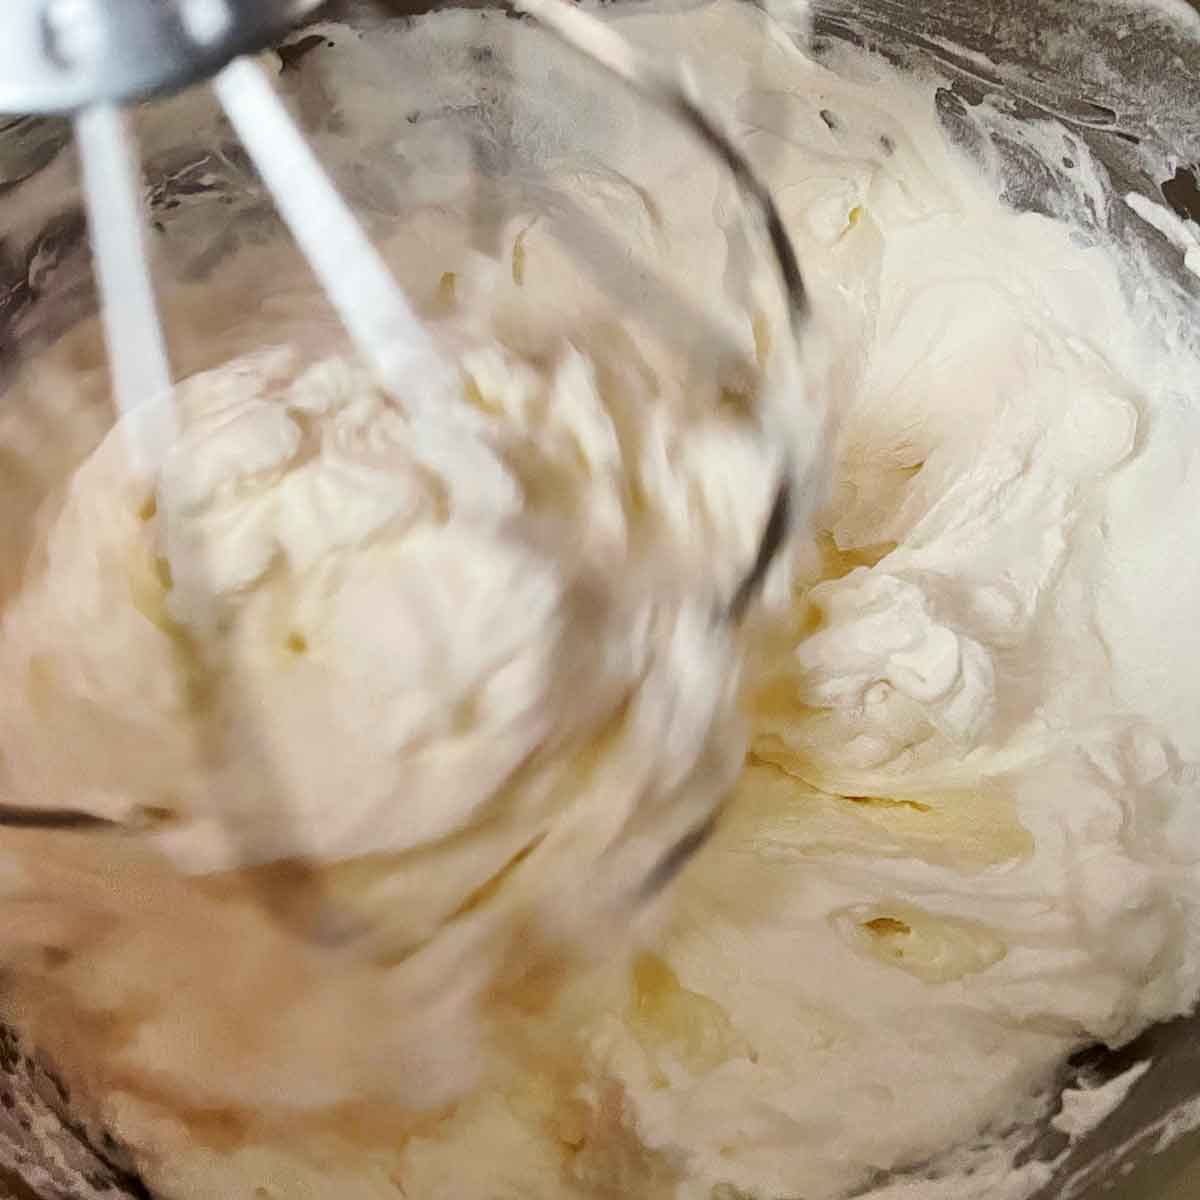 Whipping cream and cheese.